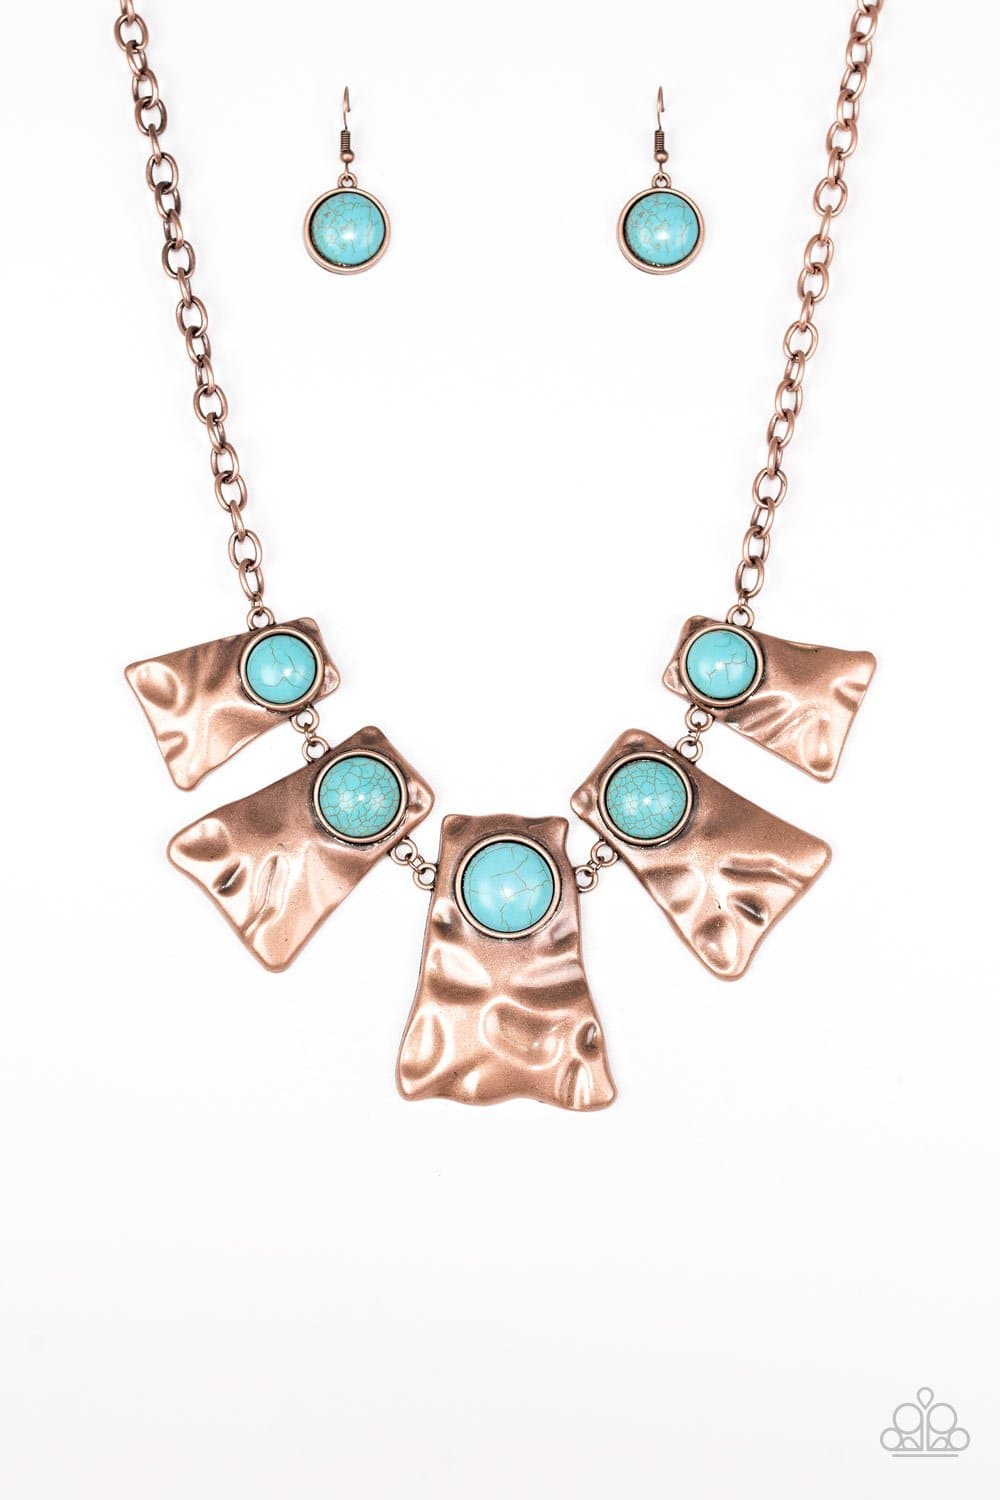 Cougar - Copper & Turquoise Necklace - Paparazzi Accessories - GlaMarous Titi Jewels